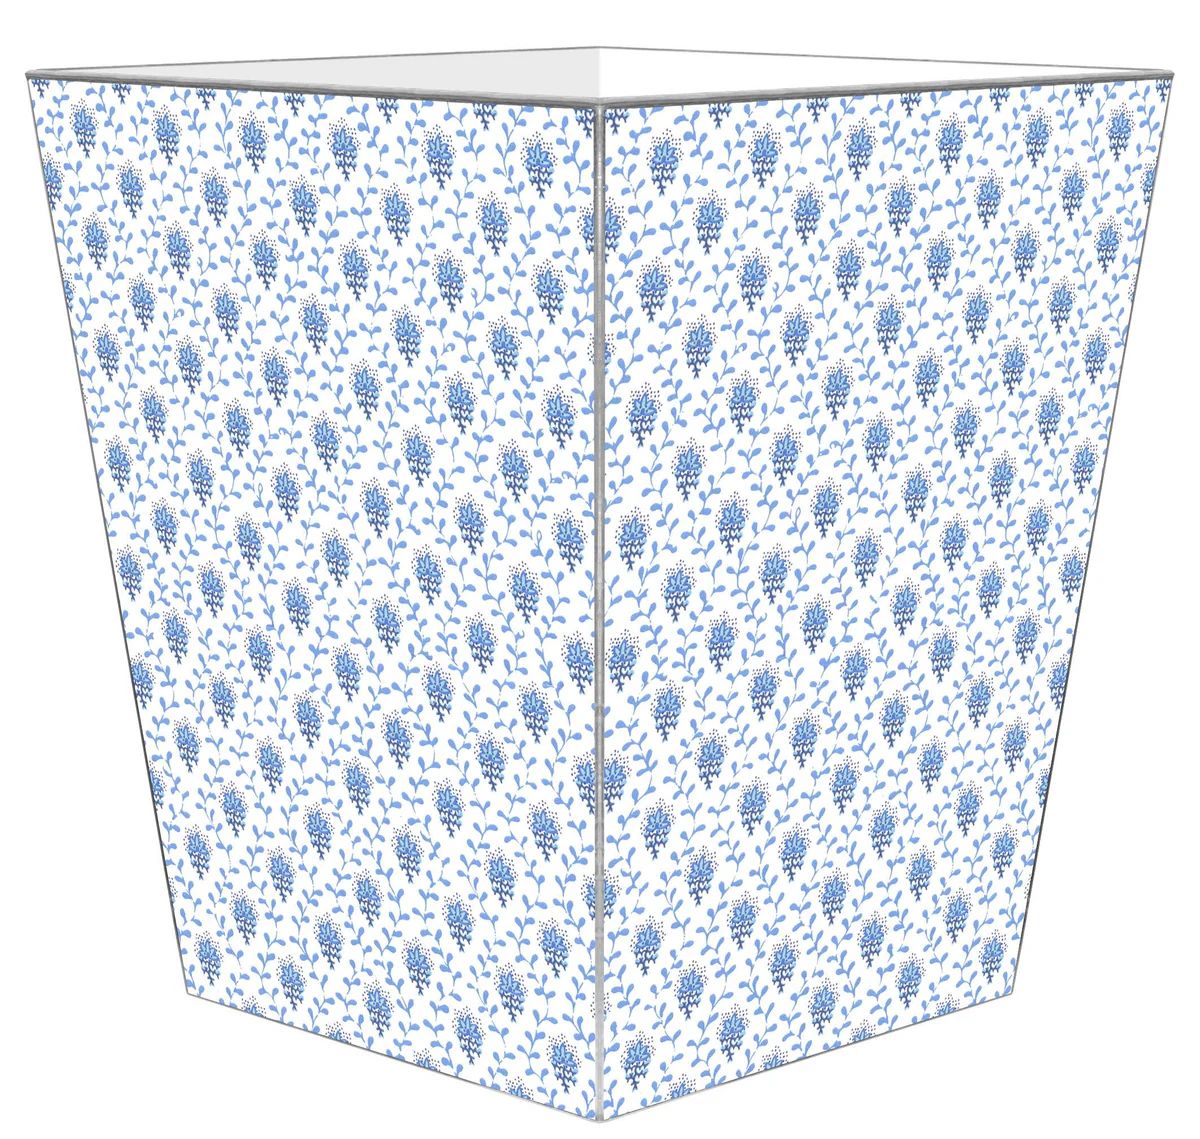 Blue Provincial Print Wastebasket and Optional Tissue Box Cover | The Well Appointed House, LLC